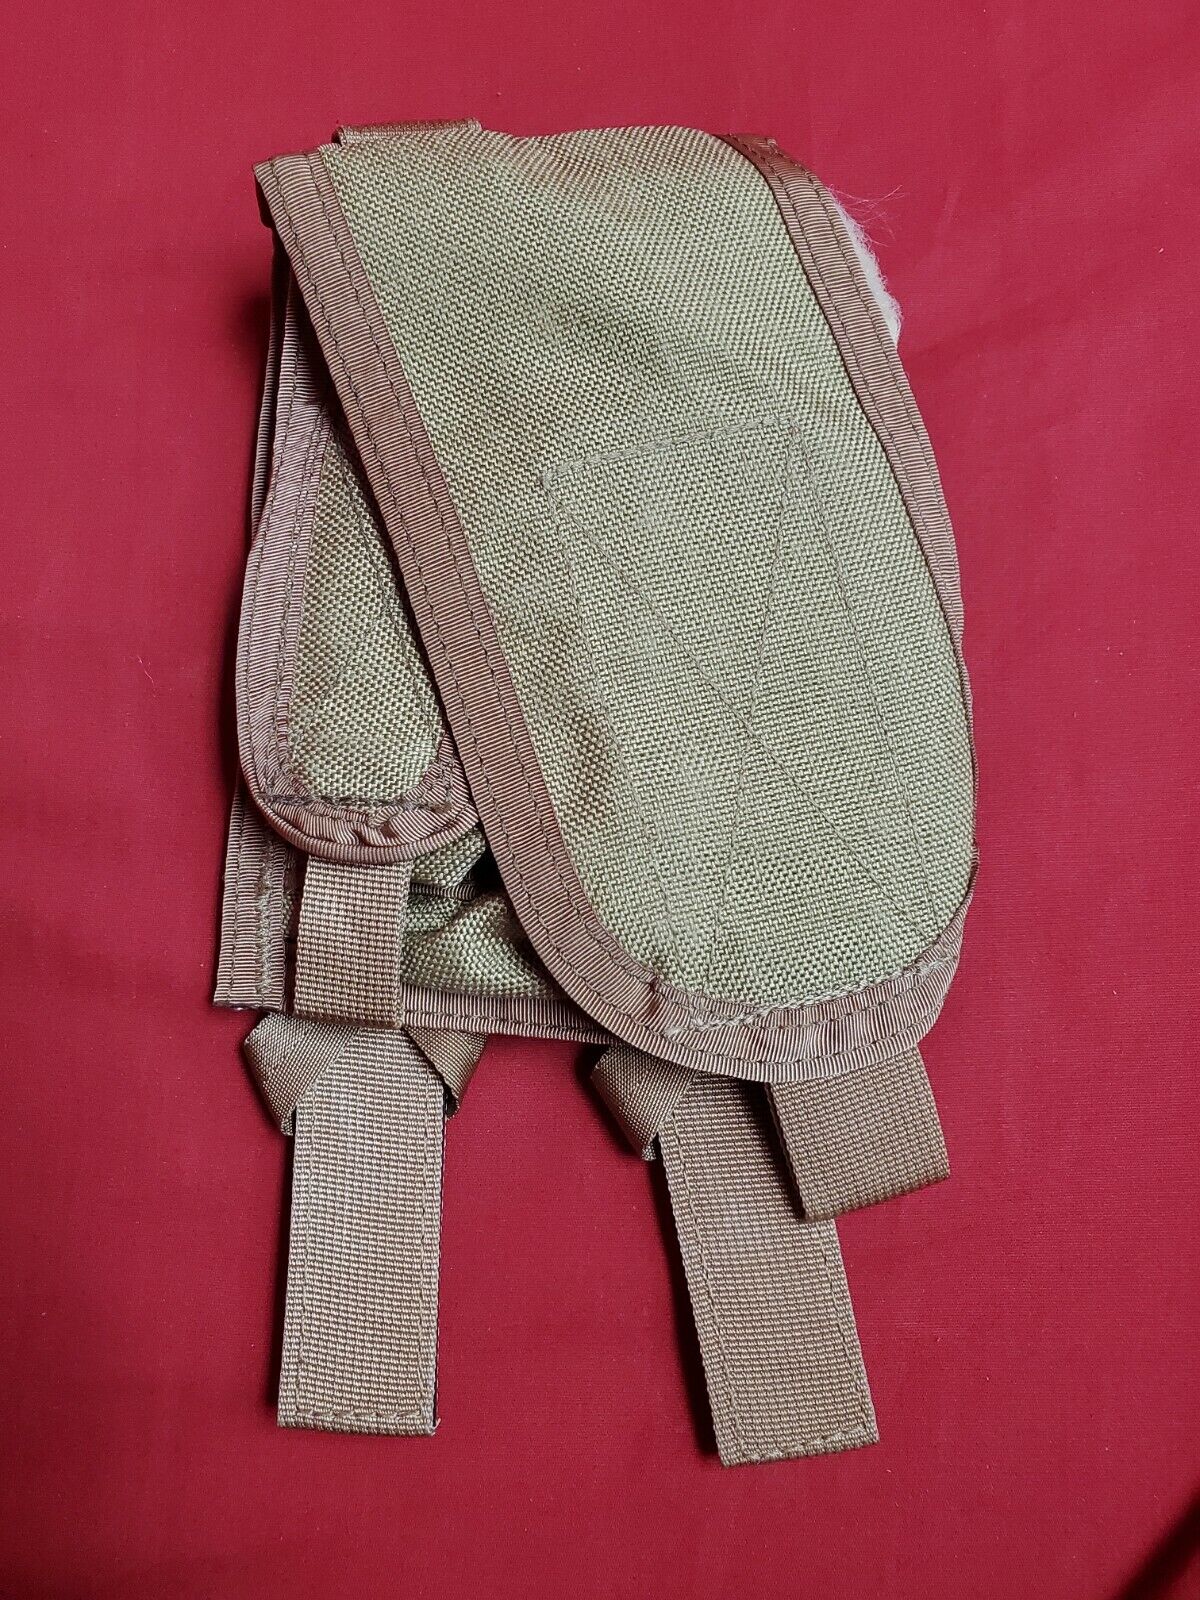 Paraclete Pre-MSA PINKY TAN Double Mag Pouch w/ 40m m  - CAG ACE Delta SOF SEAL